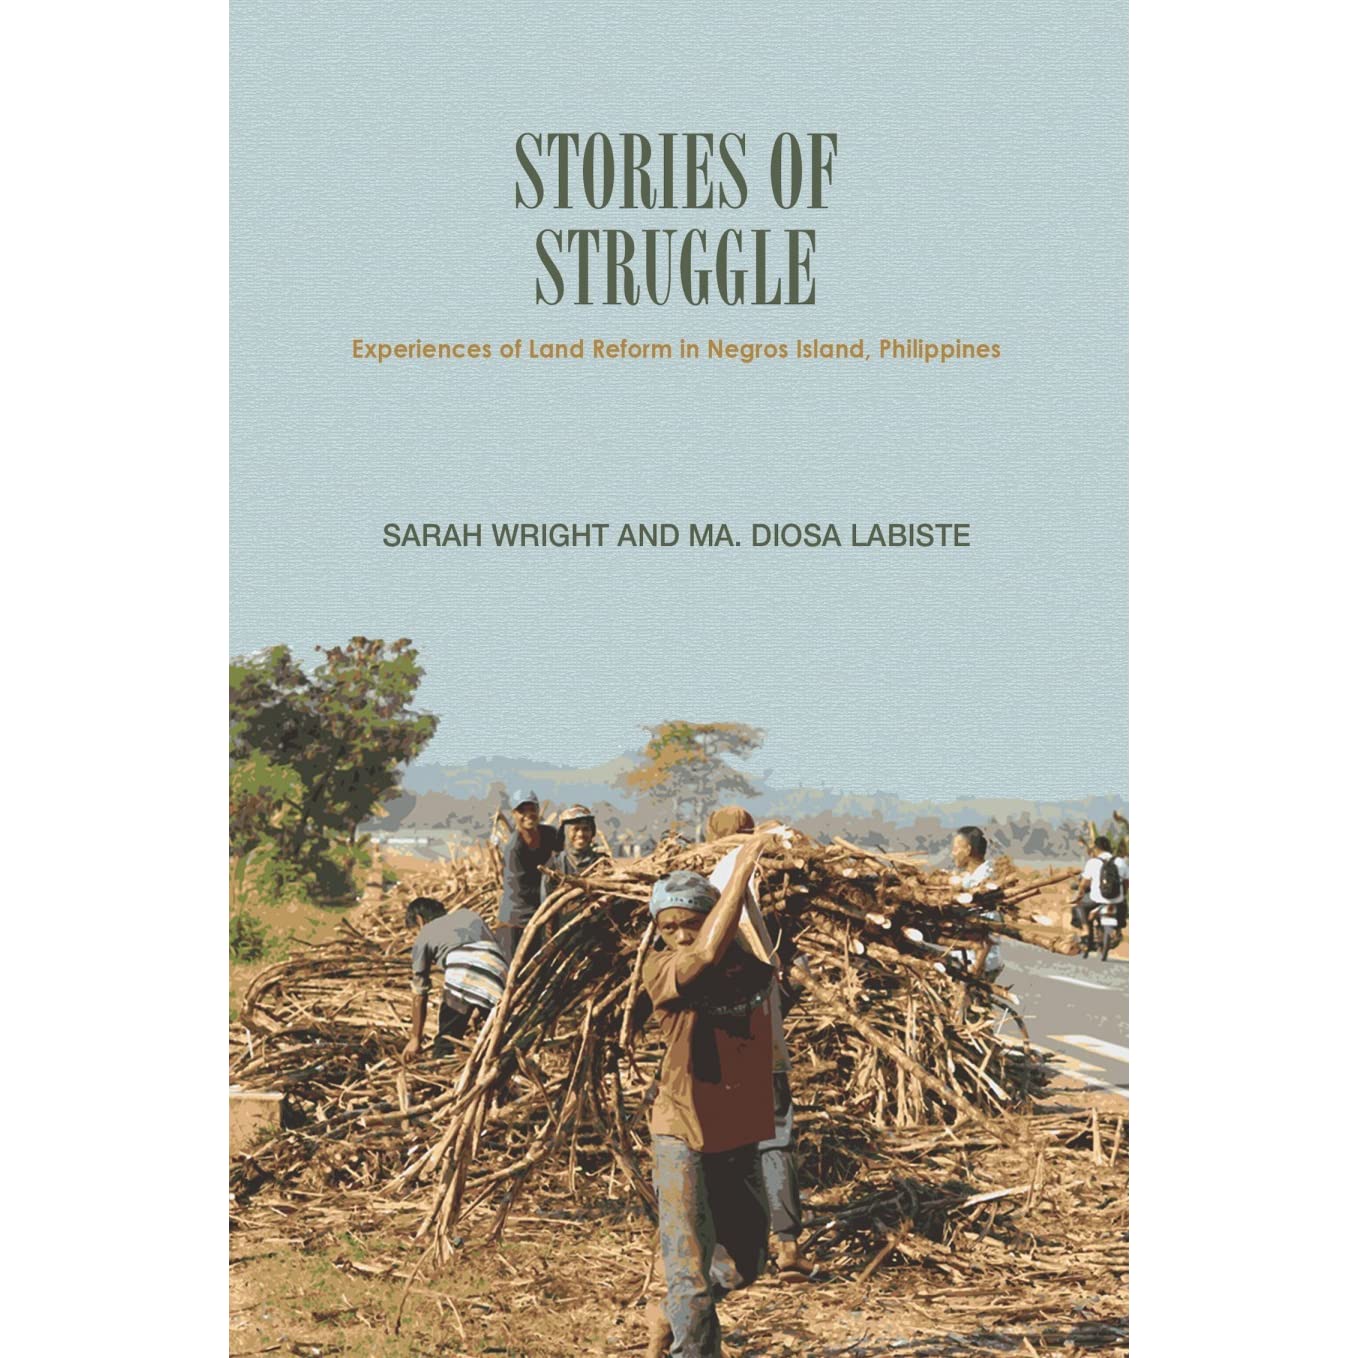 Stories of struggle experiences of land reform in Negros Island, Philippines